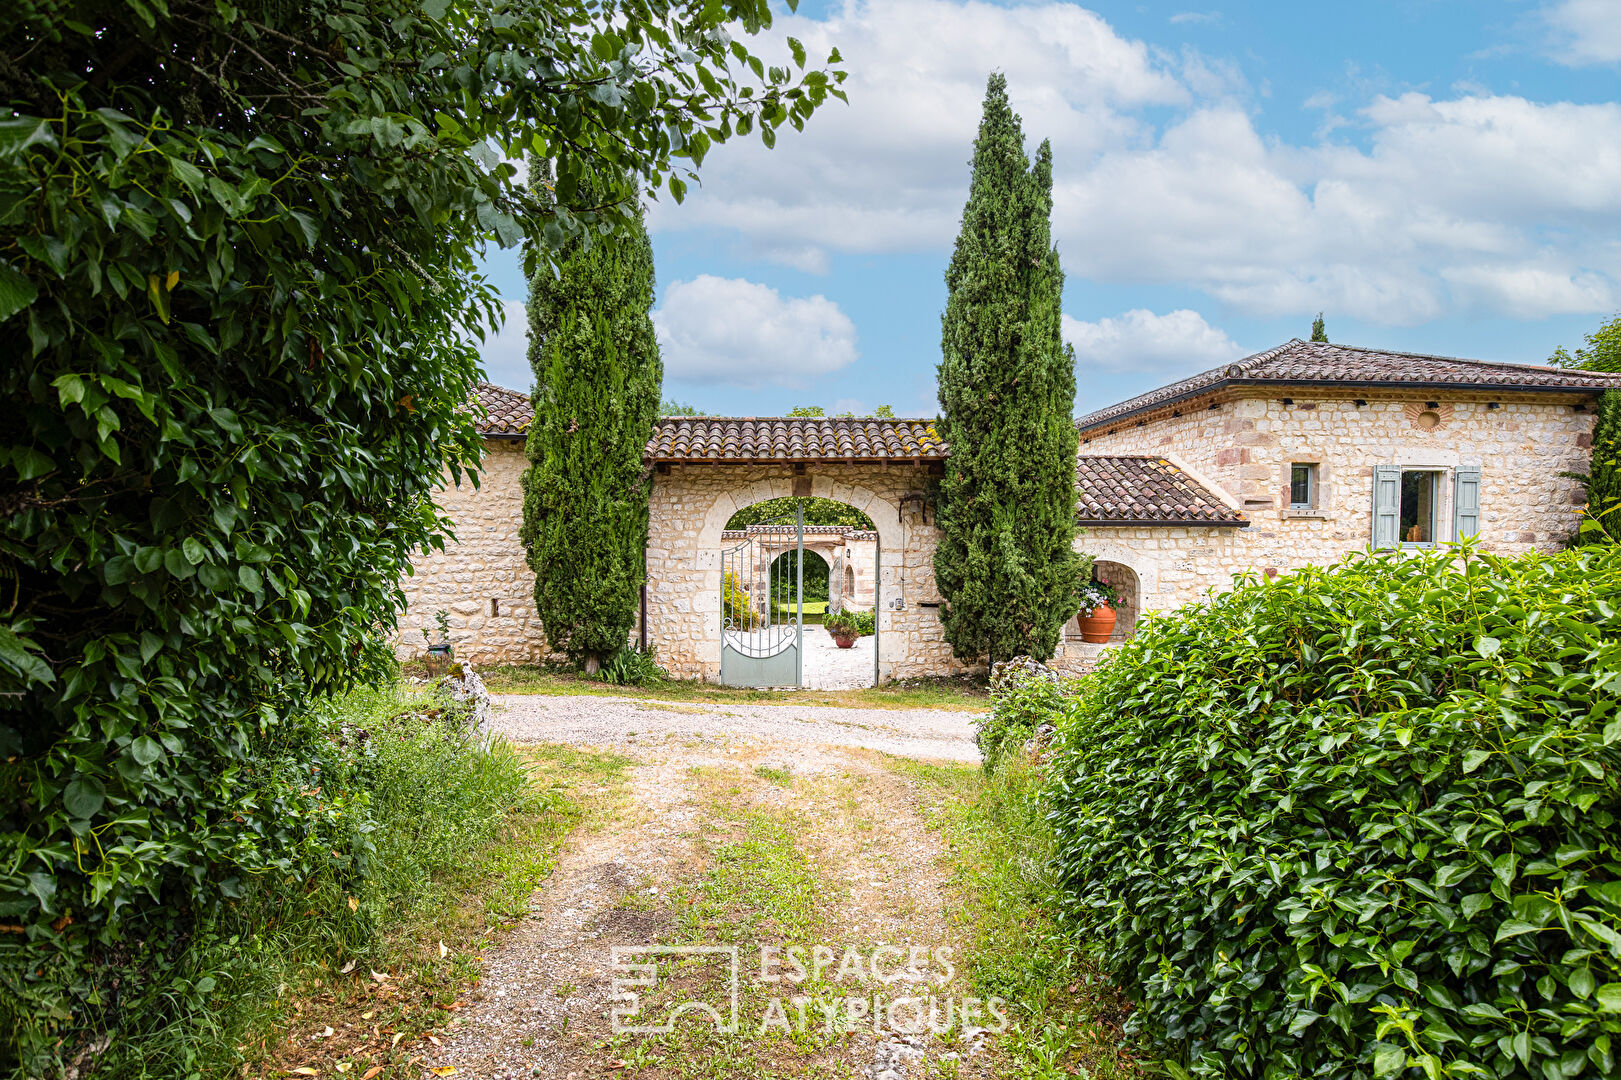 Exceptional 17th century estate with large wooded park in Gaillac